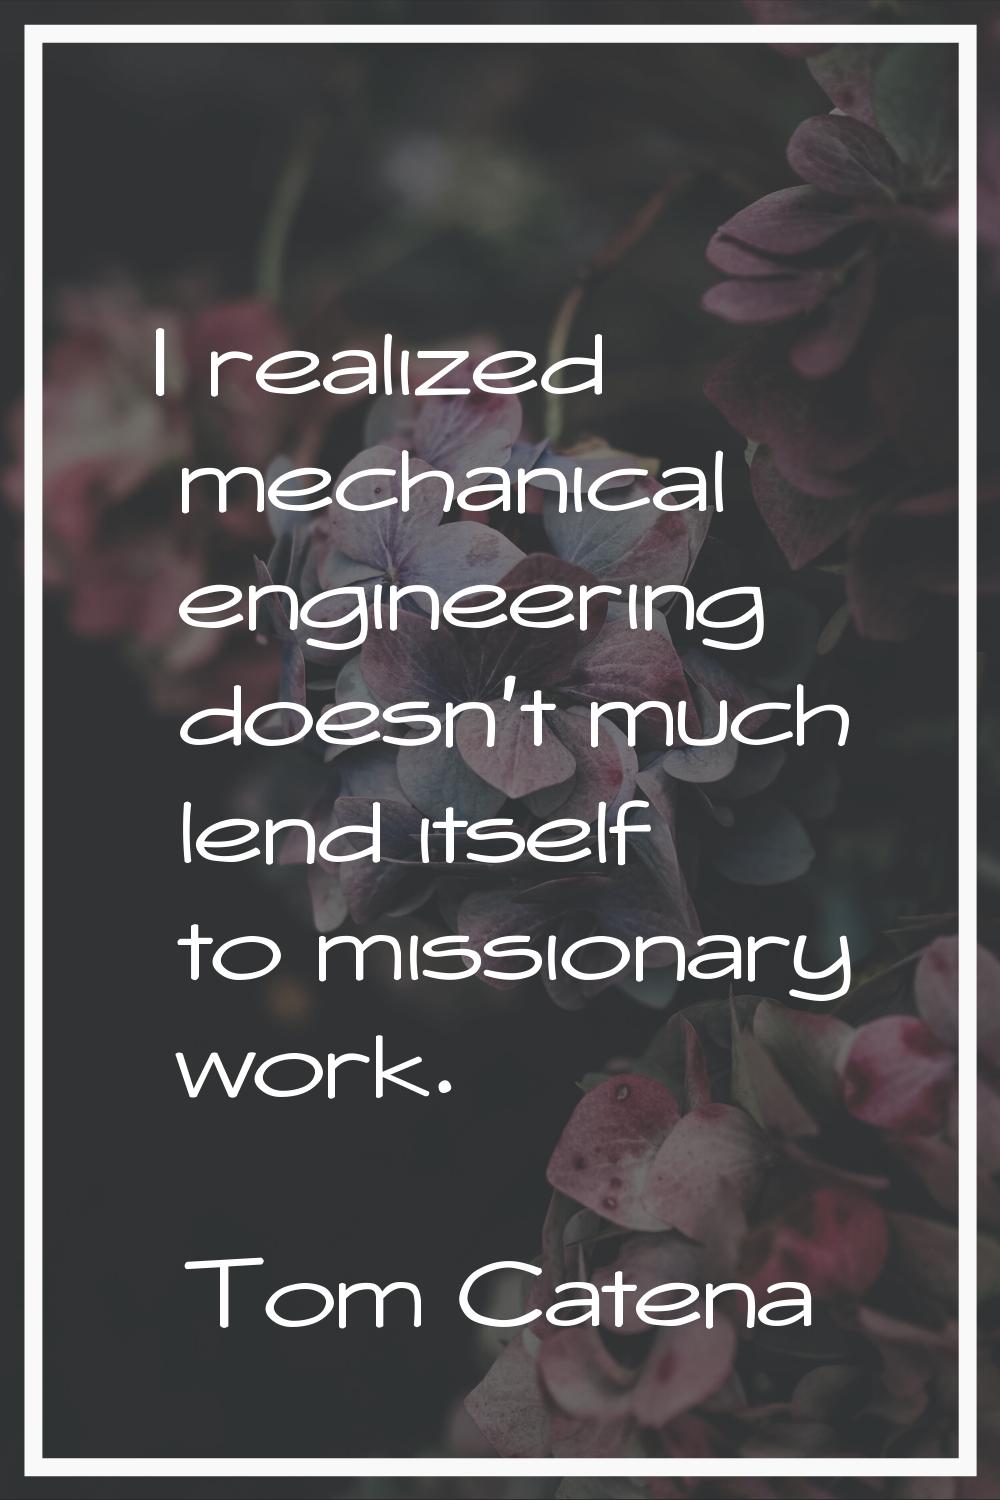 I realized mechanical engineering doesn't much lend itself to missionary work.